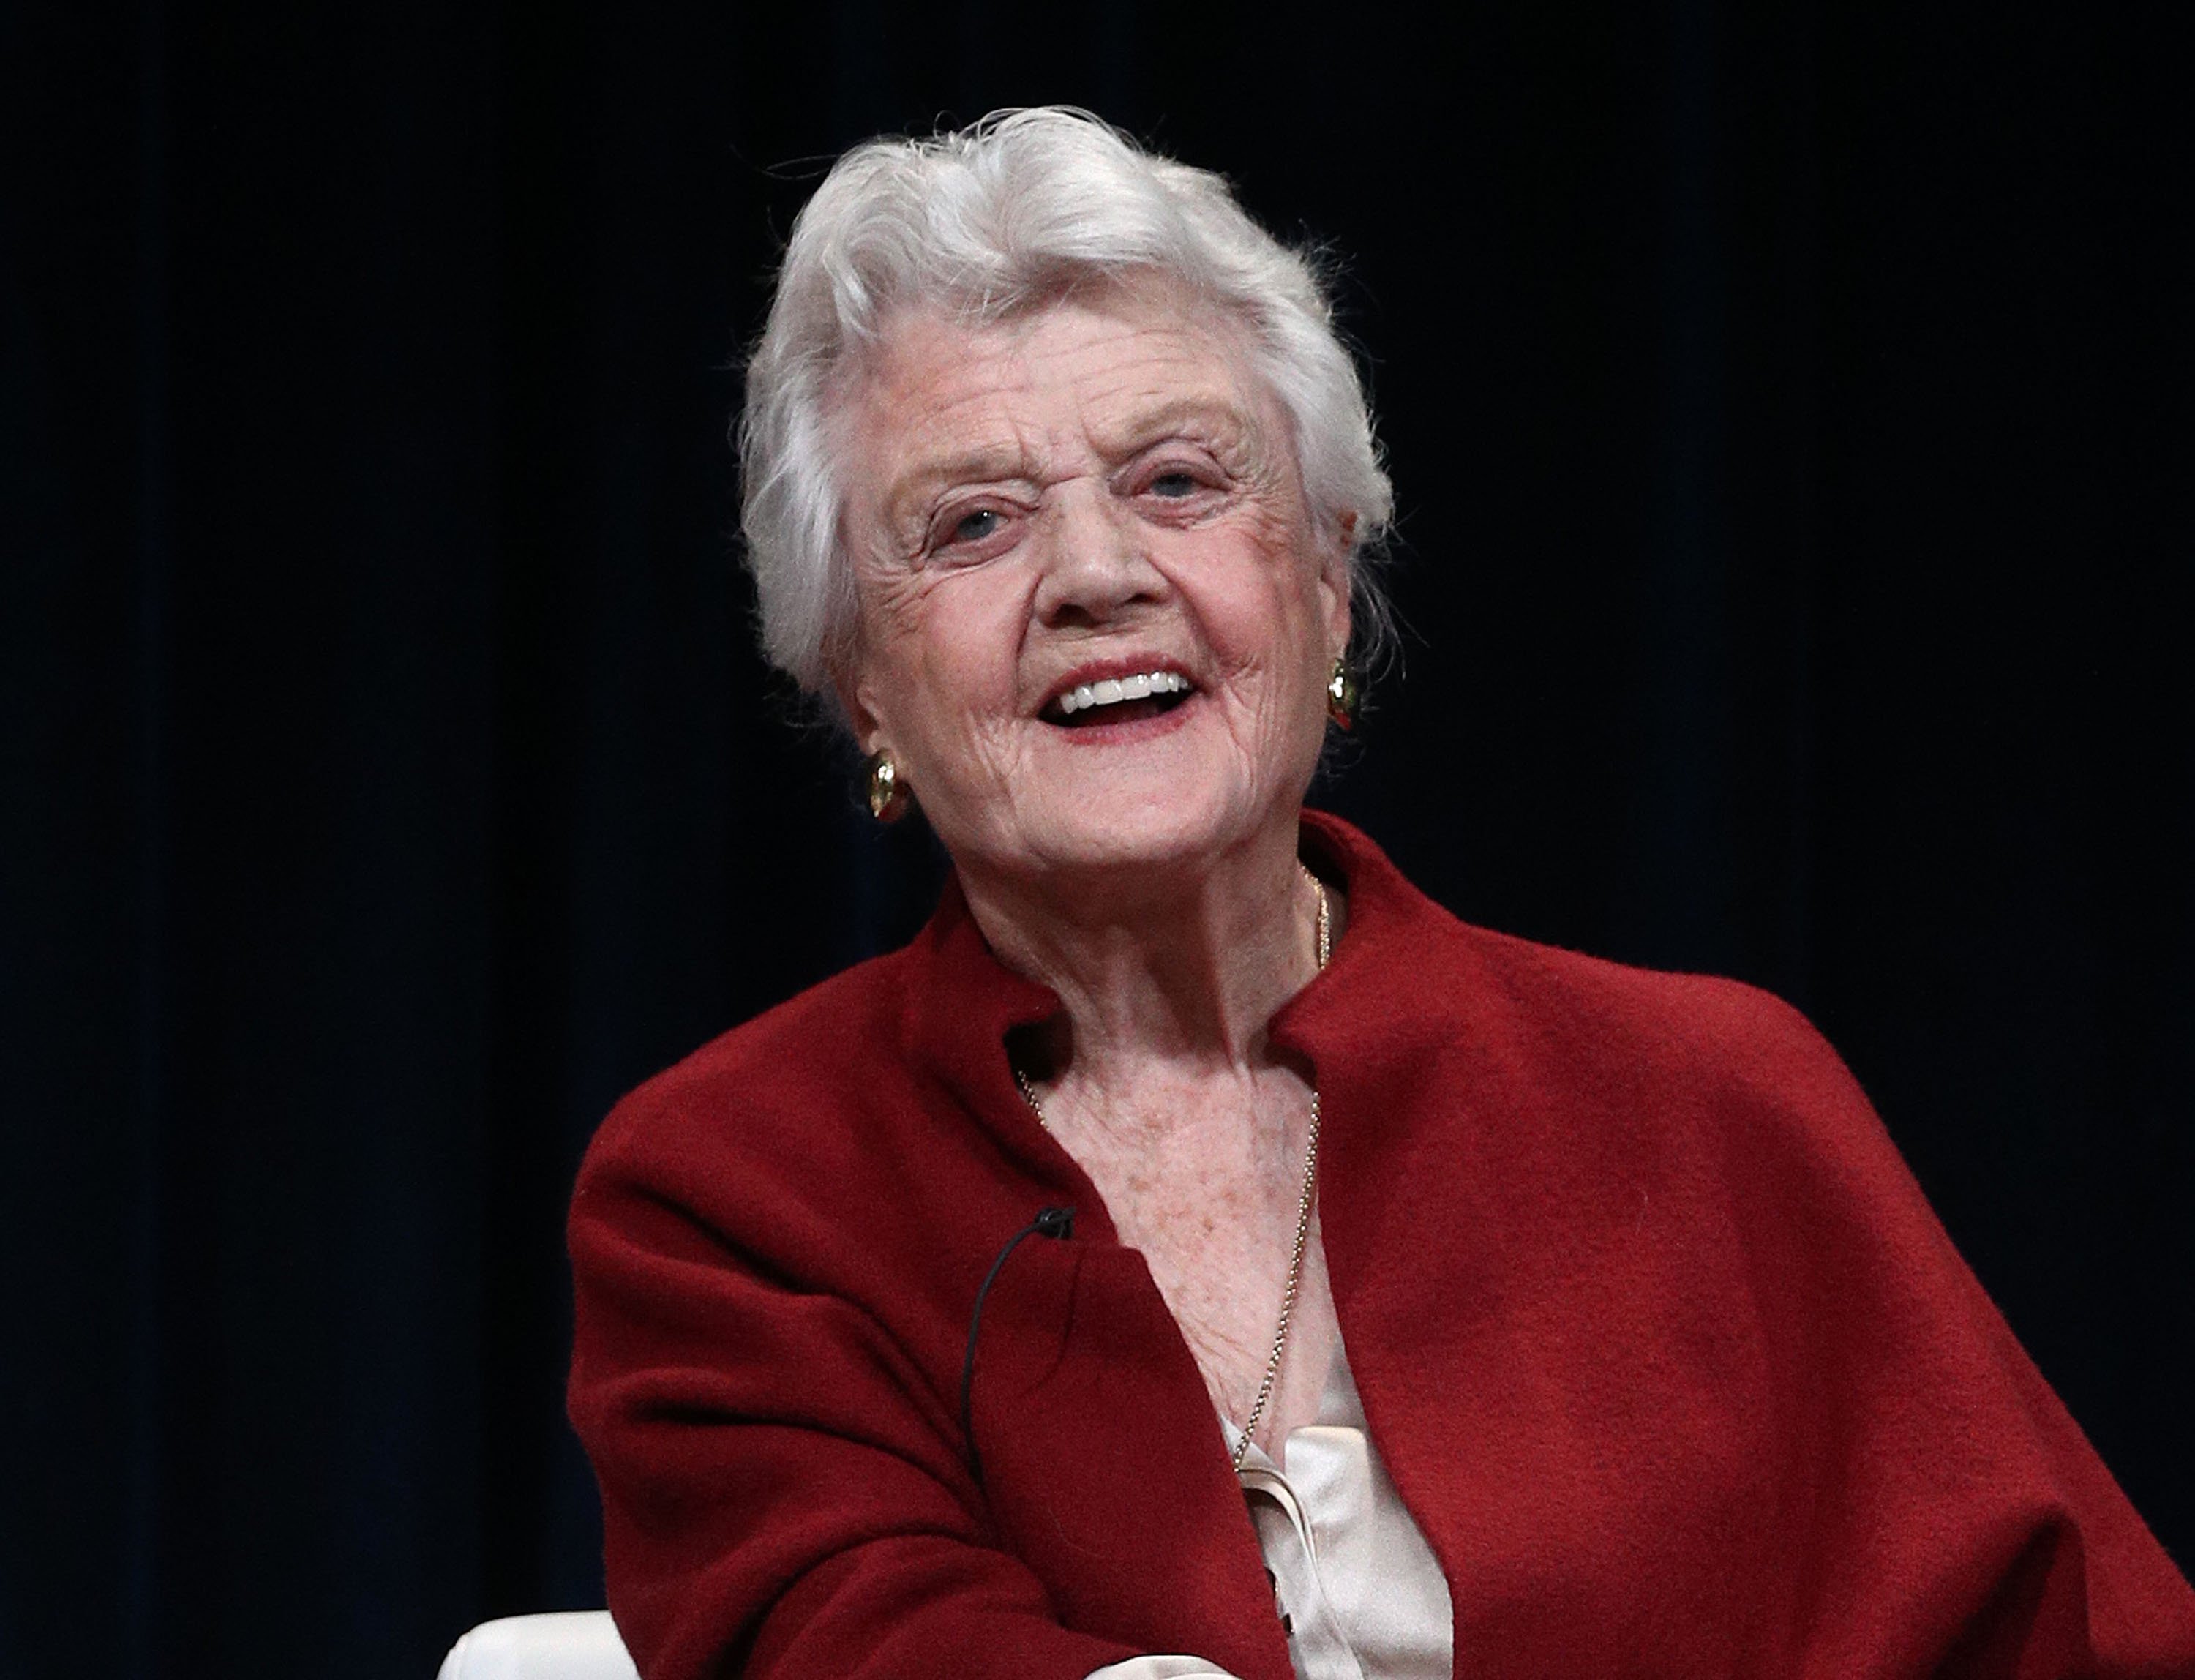 Actress Angela Lansbury speaks during the PBS segment of the 2018 Winter Television Critics Association Press Tour at The Langham Huntington, Pasadena on January 16, 2018 in Pasadena, California. | Source: Getty Images